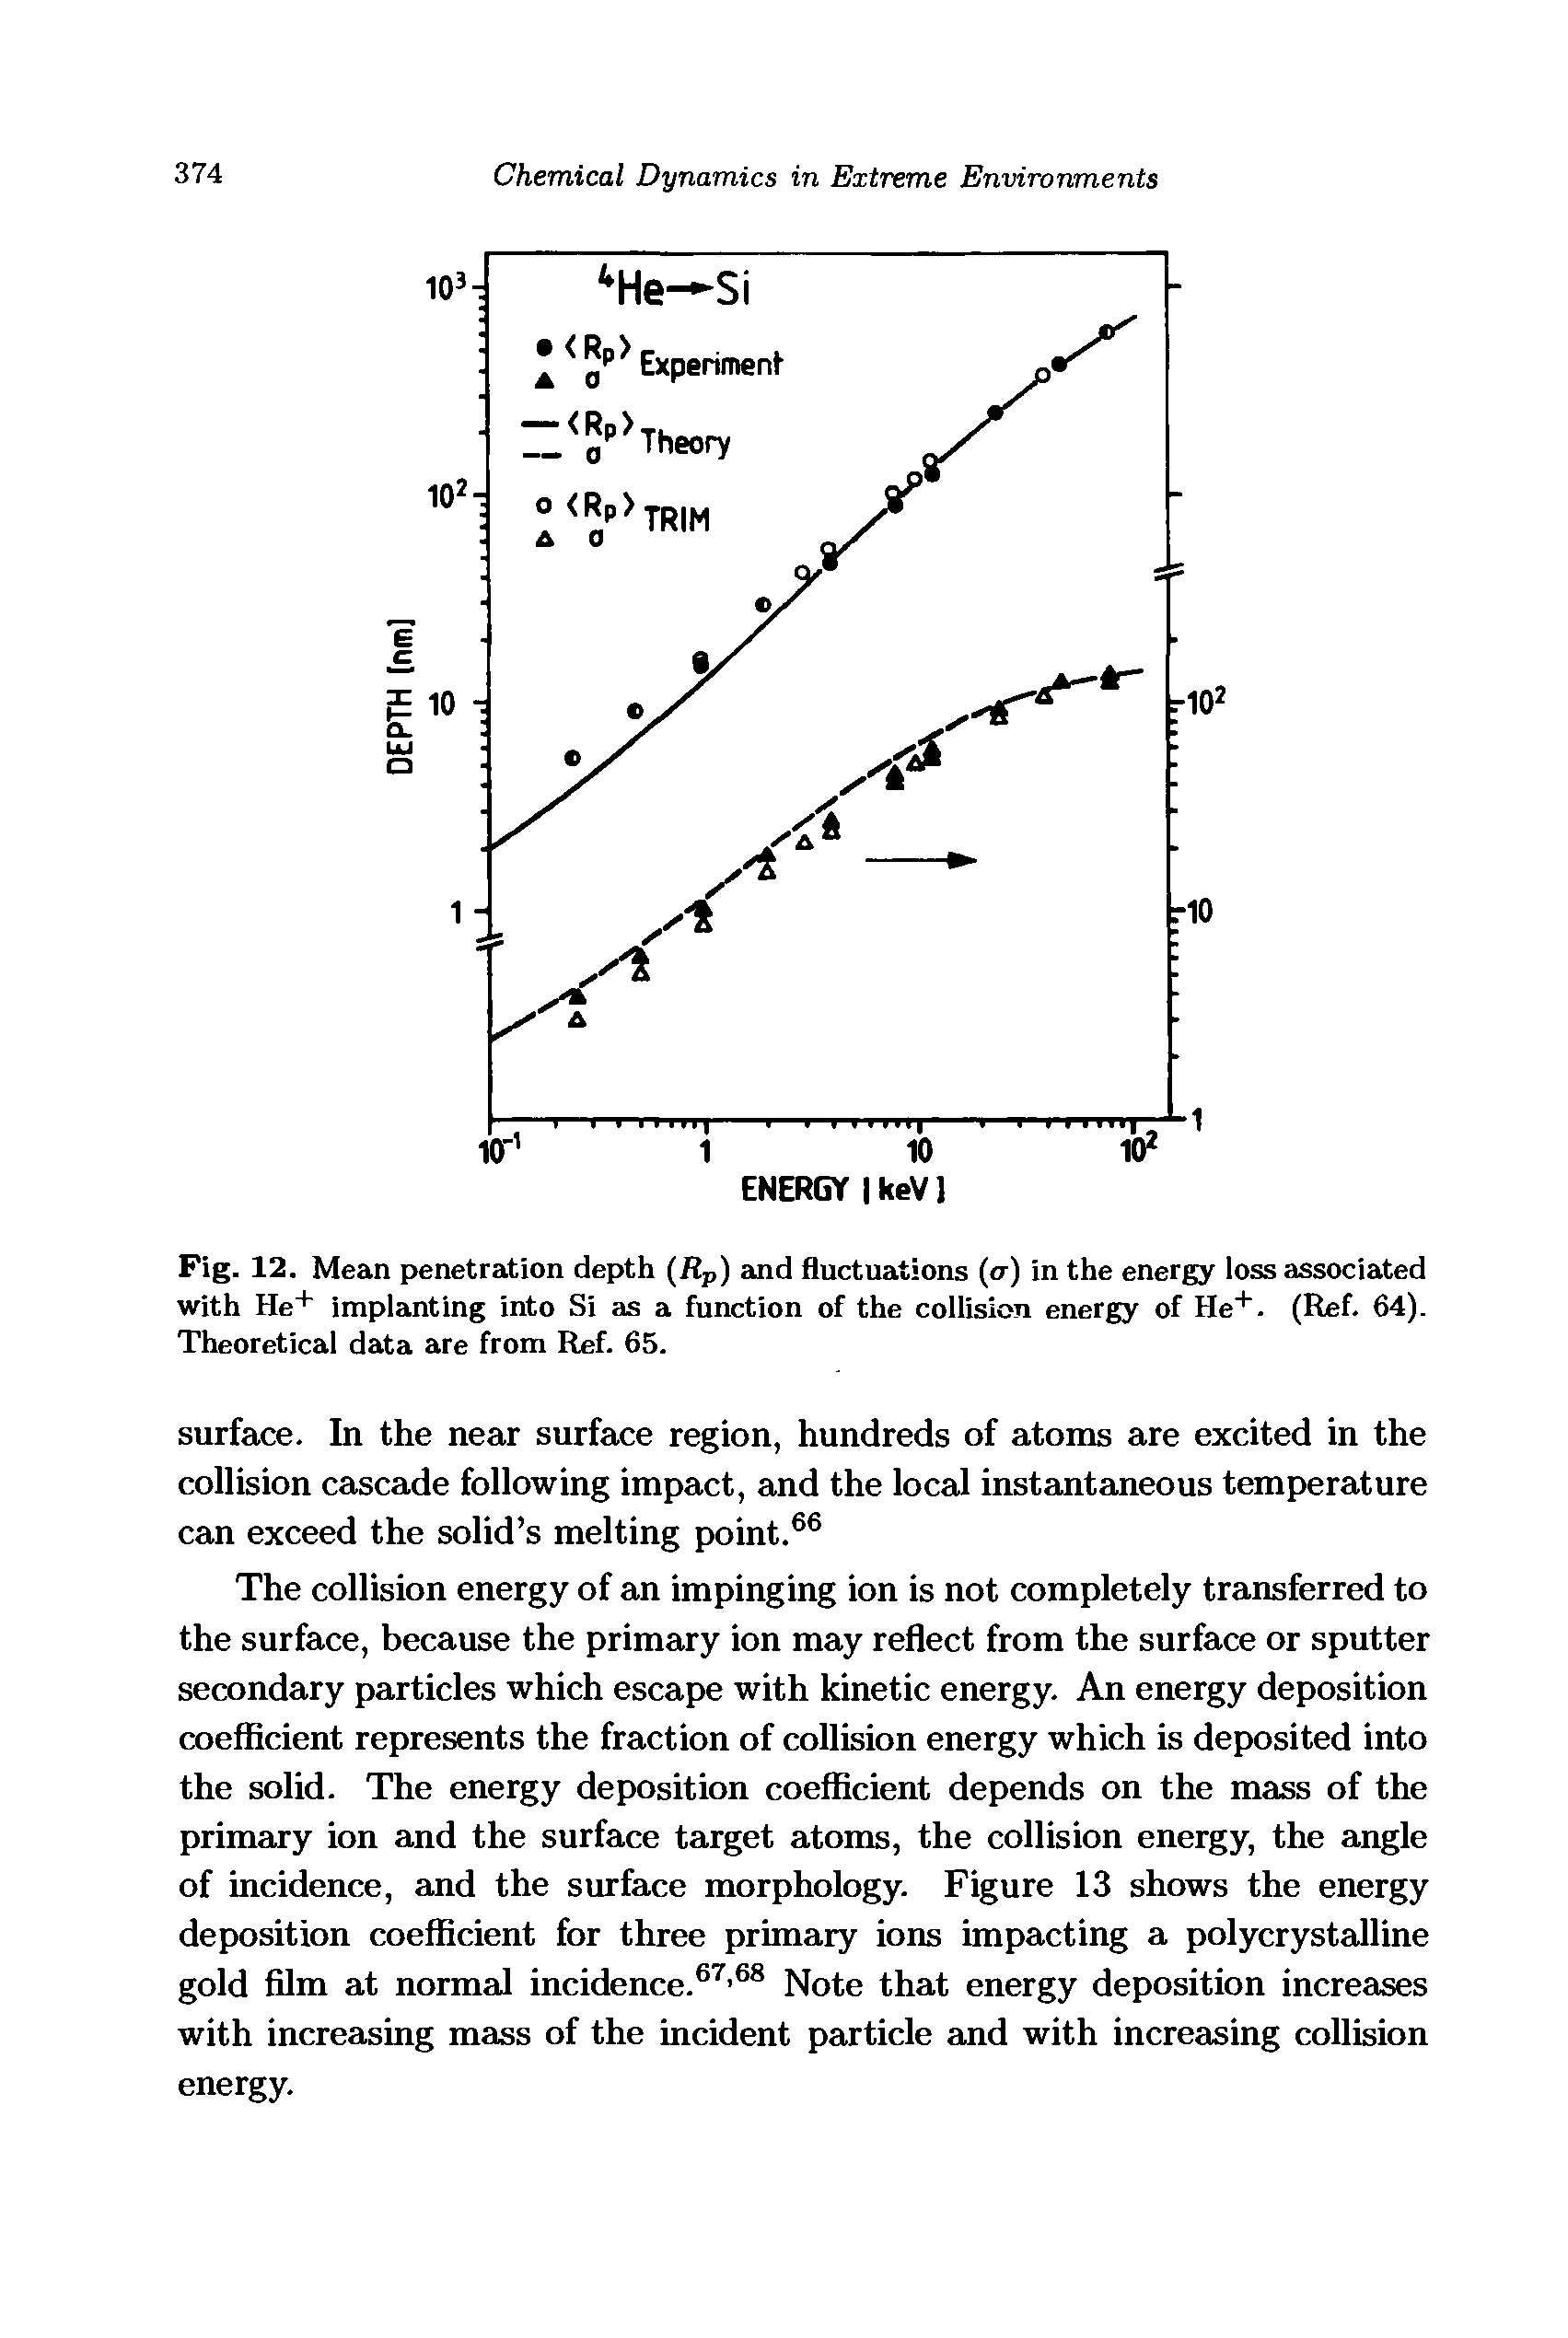 Fig. 12. Mean penetration depth (Rp) and fluctuations (<7) in the energy loss associated with He+ implanting into Si as a function of the collision energy of He . (Ref. 64). Theoretical data are from Ref. 65.